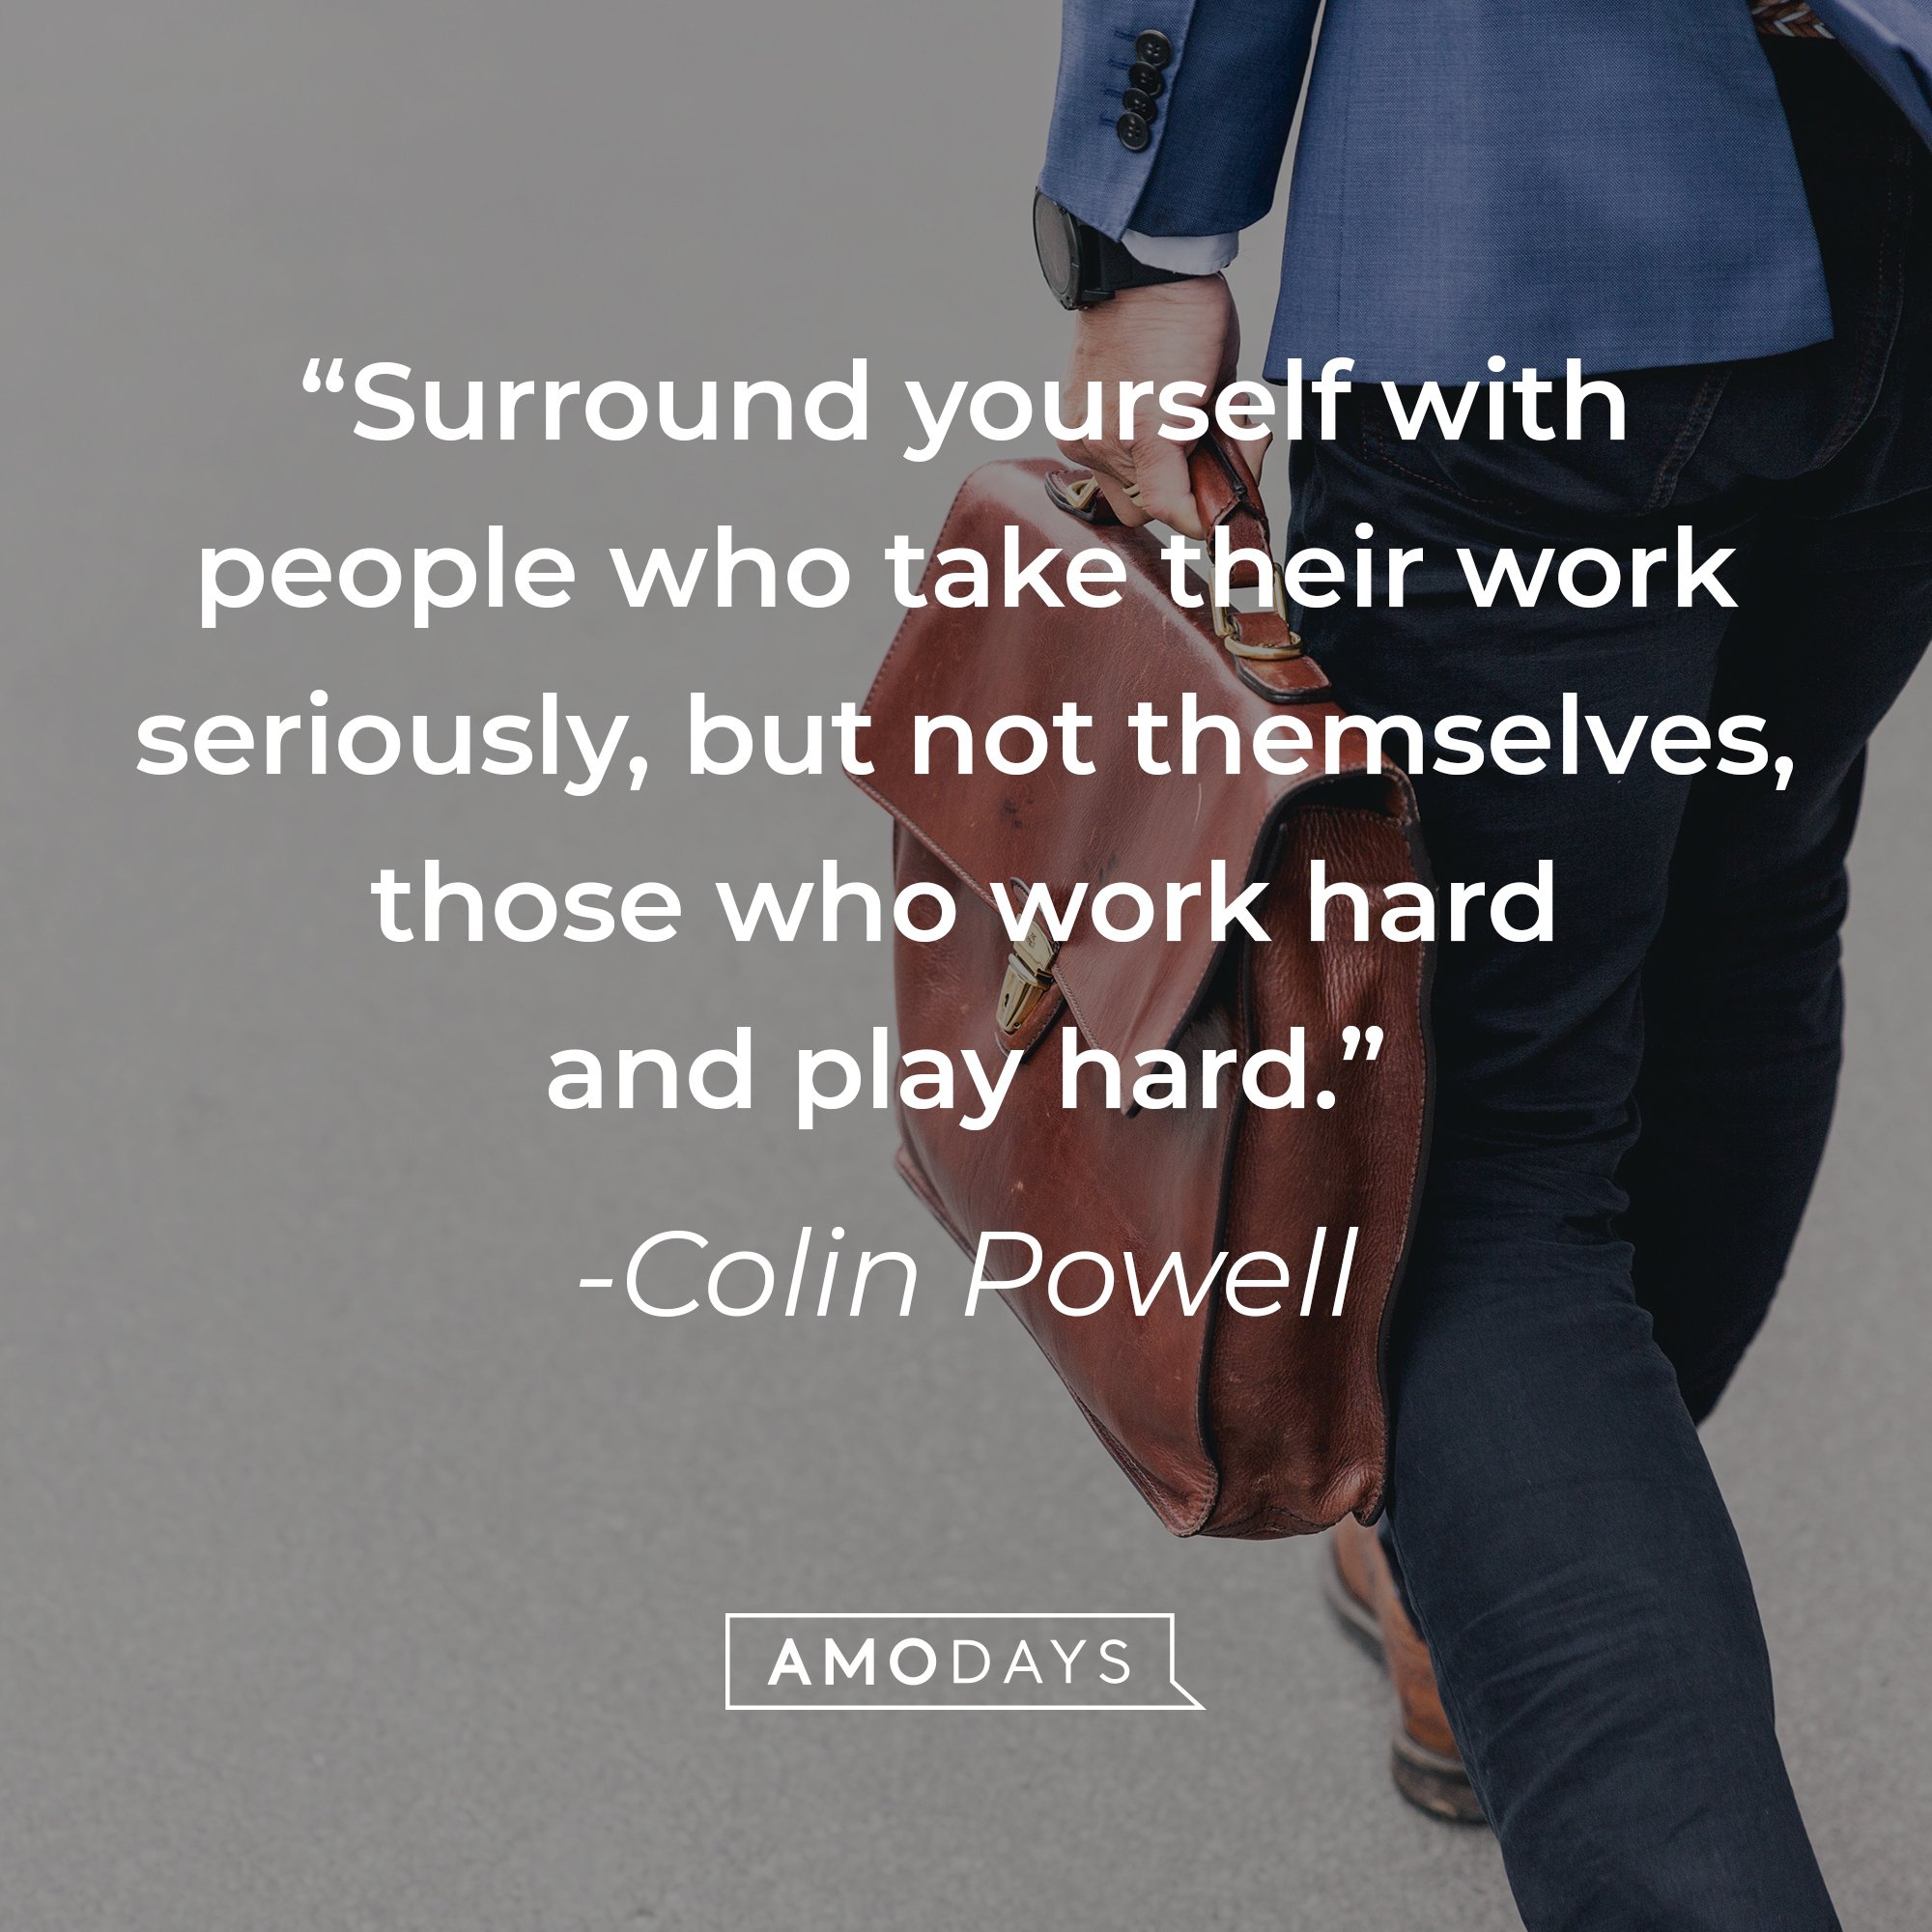 Colin Powell's quote: "Surround yourself with people who take their work seriously, but not themselves, those who work hard and play hard." | Image: AmoDays